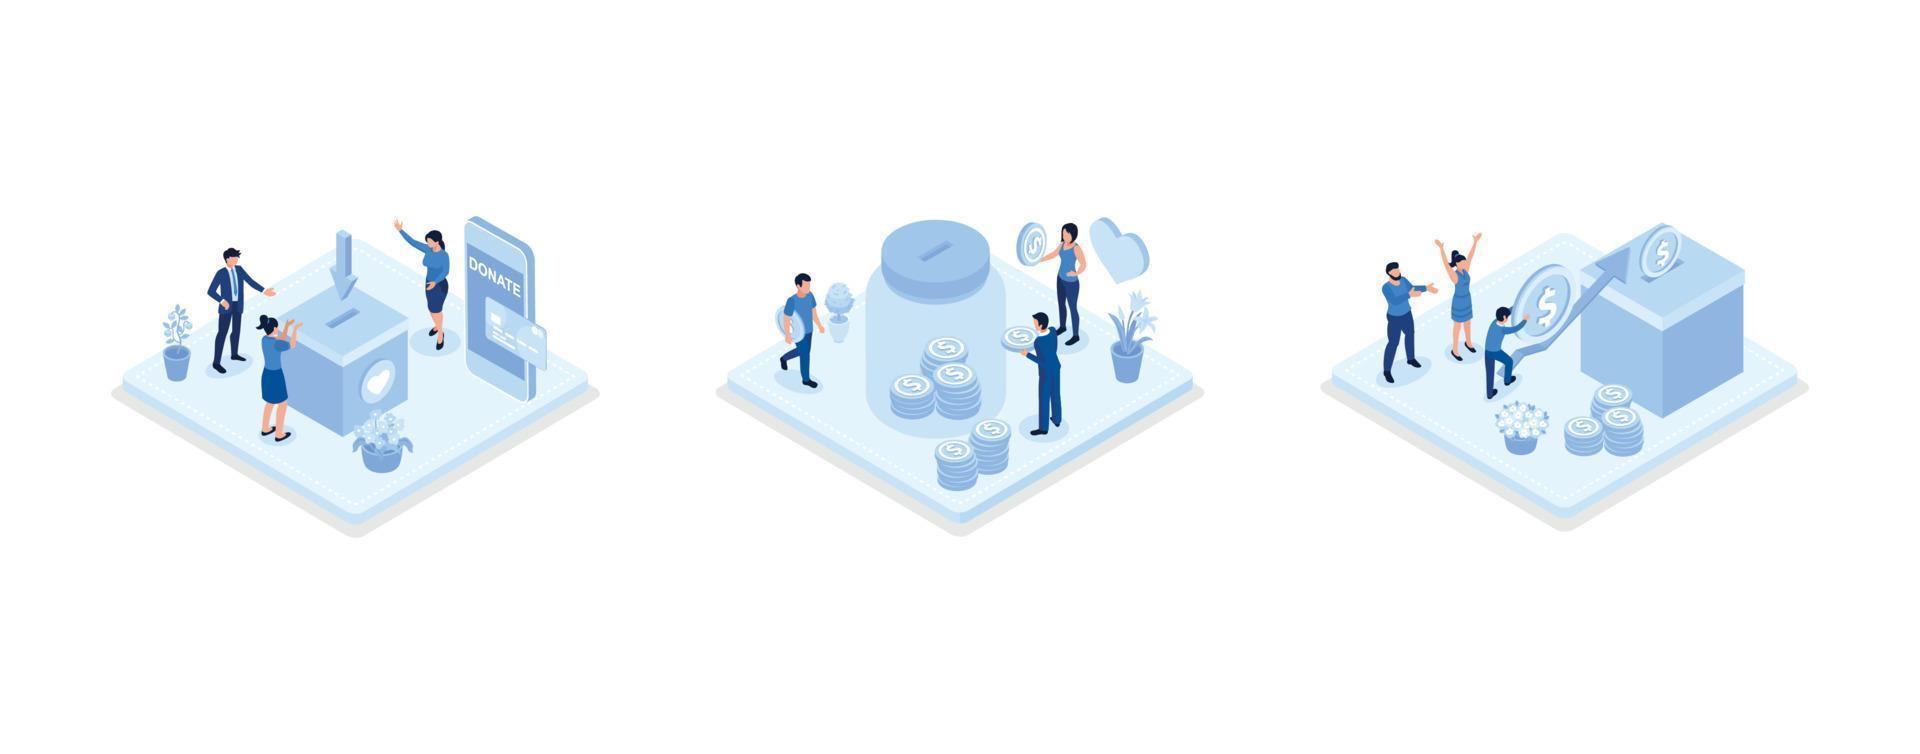 Volunteers putting coins in donation box and donating with credit card online. Financial support and fundraising concept, set isometric vector illustration